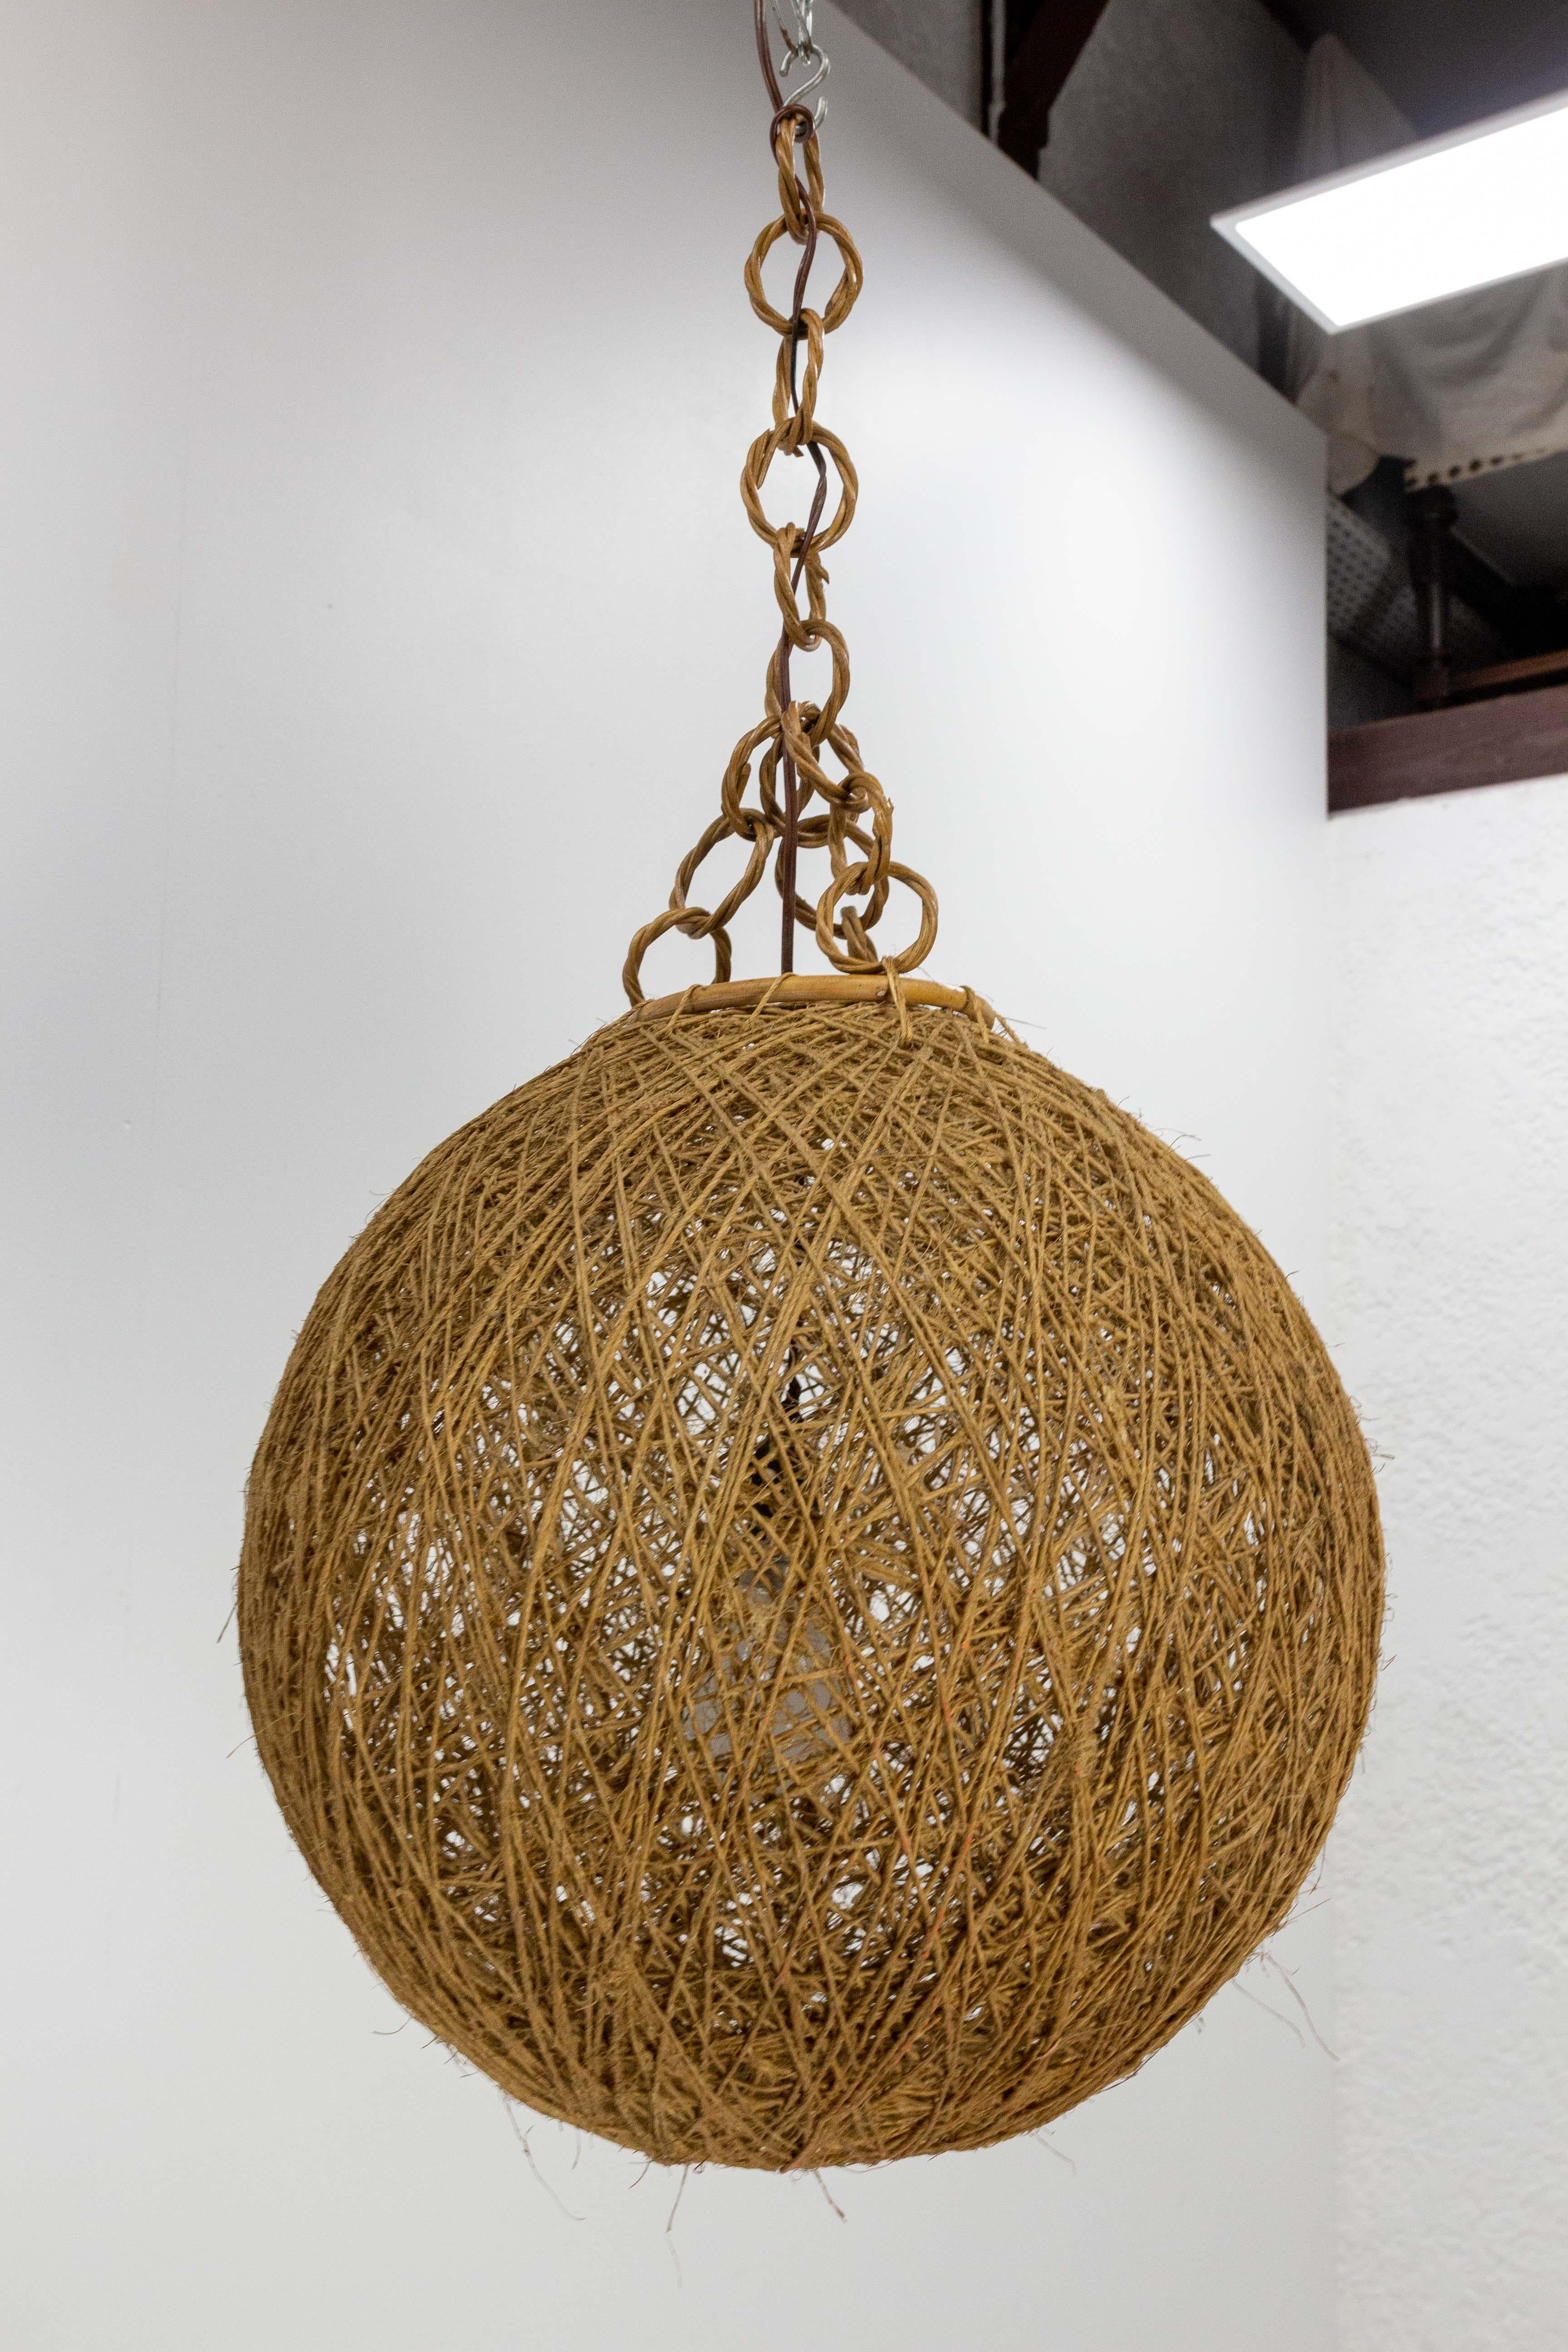 French Ceiling Pendant String and Wicker Chandelier, Lustre, circa 1970 For Sale 2